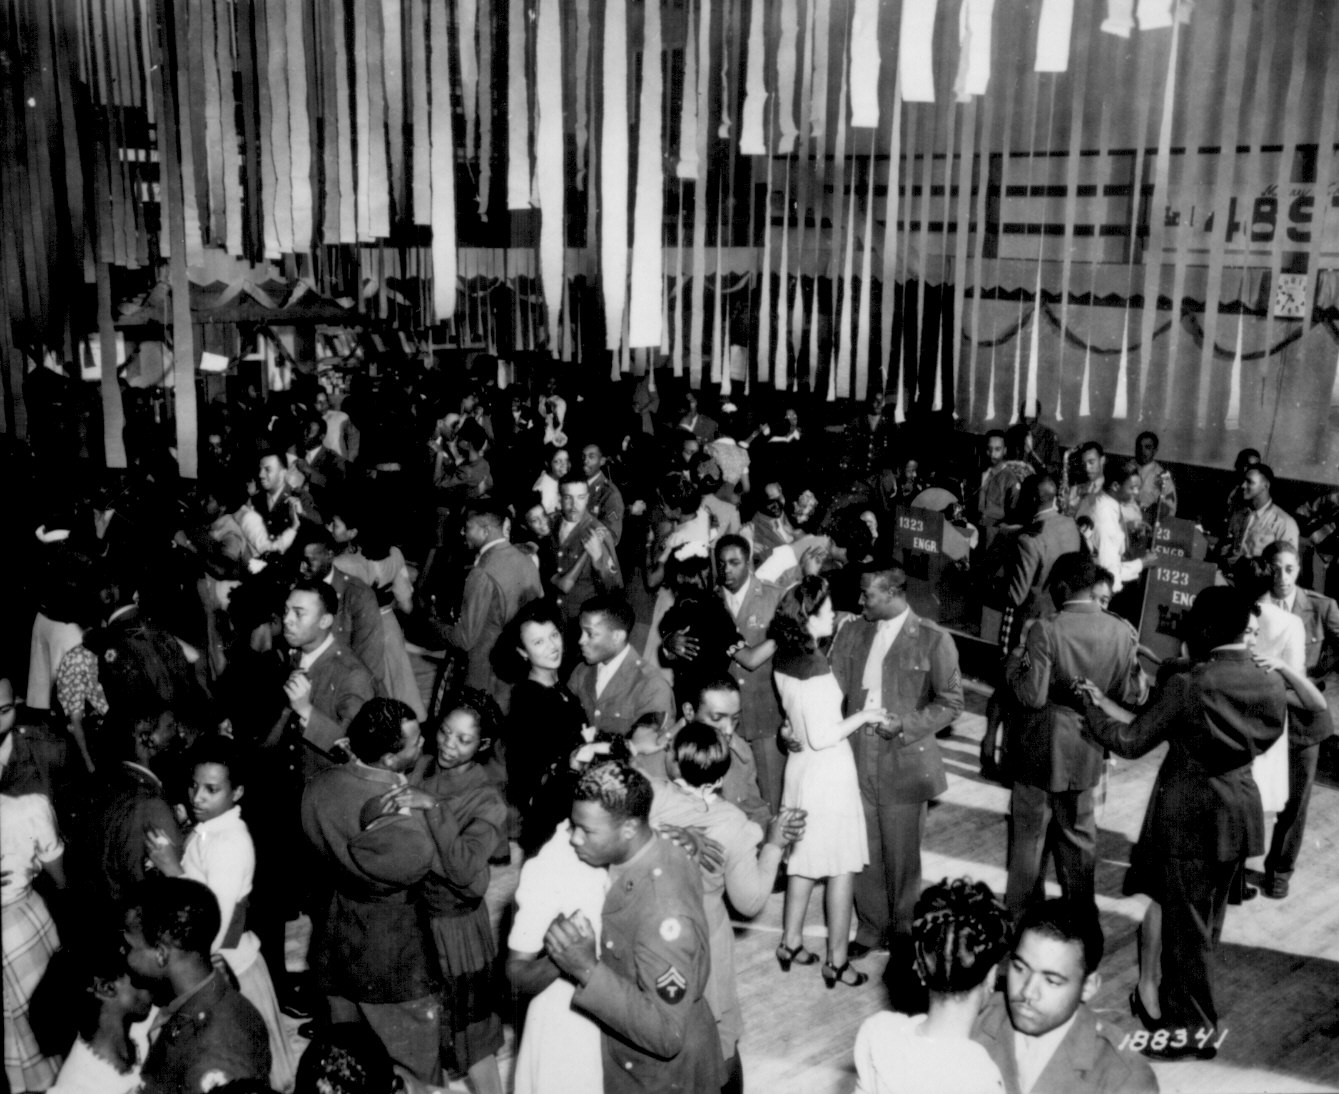 Christmas Dance for African-American US Army soldiers of 1323rd Engineers at Negro Service Club #3, Camp Swift, Texas, United States, 23 Dec 1943